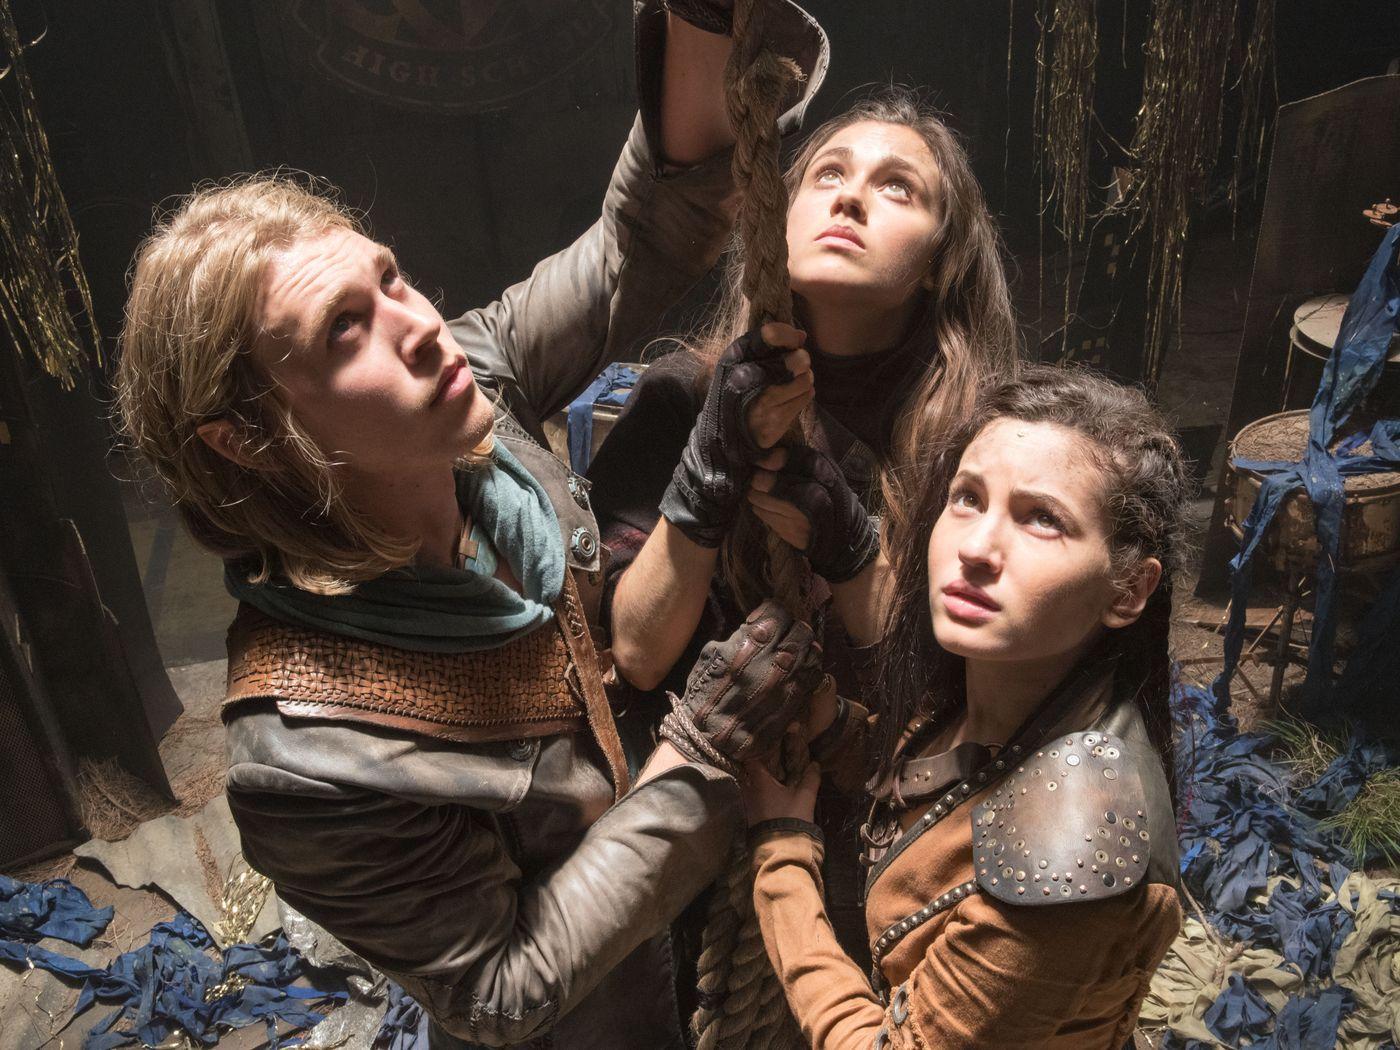 The Shannara Chronicles is Game of Thrones without wrinkles